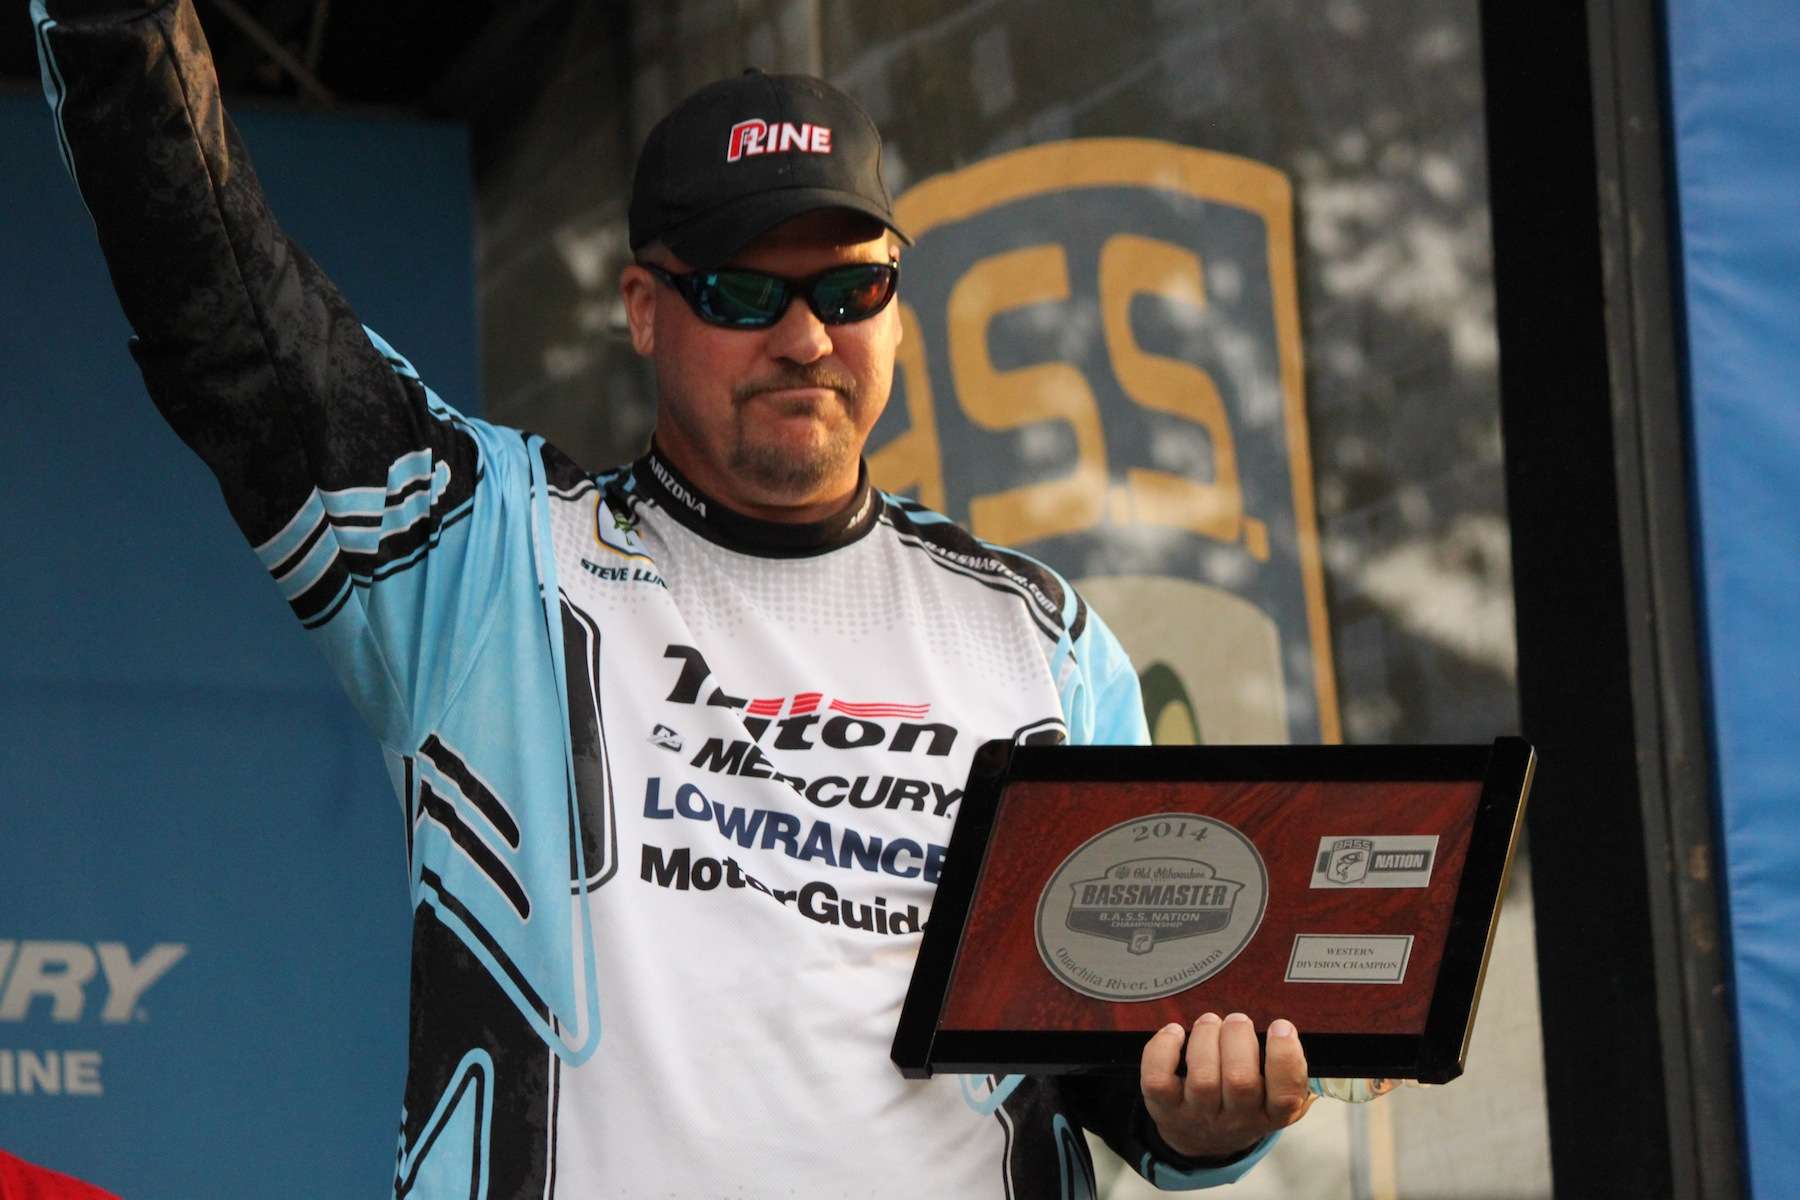 Steve Lund
Glendale, Ariz.
Old Milwaukee B.A.S.S. Nation Western Division winner (Noxon Reservoir). Lund is a member of the Old Milwaukee Bassmaster B.A.S.S. Nation Classic Fishing Team.
